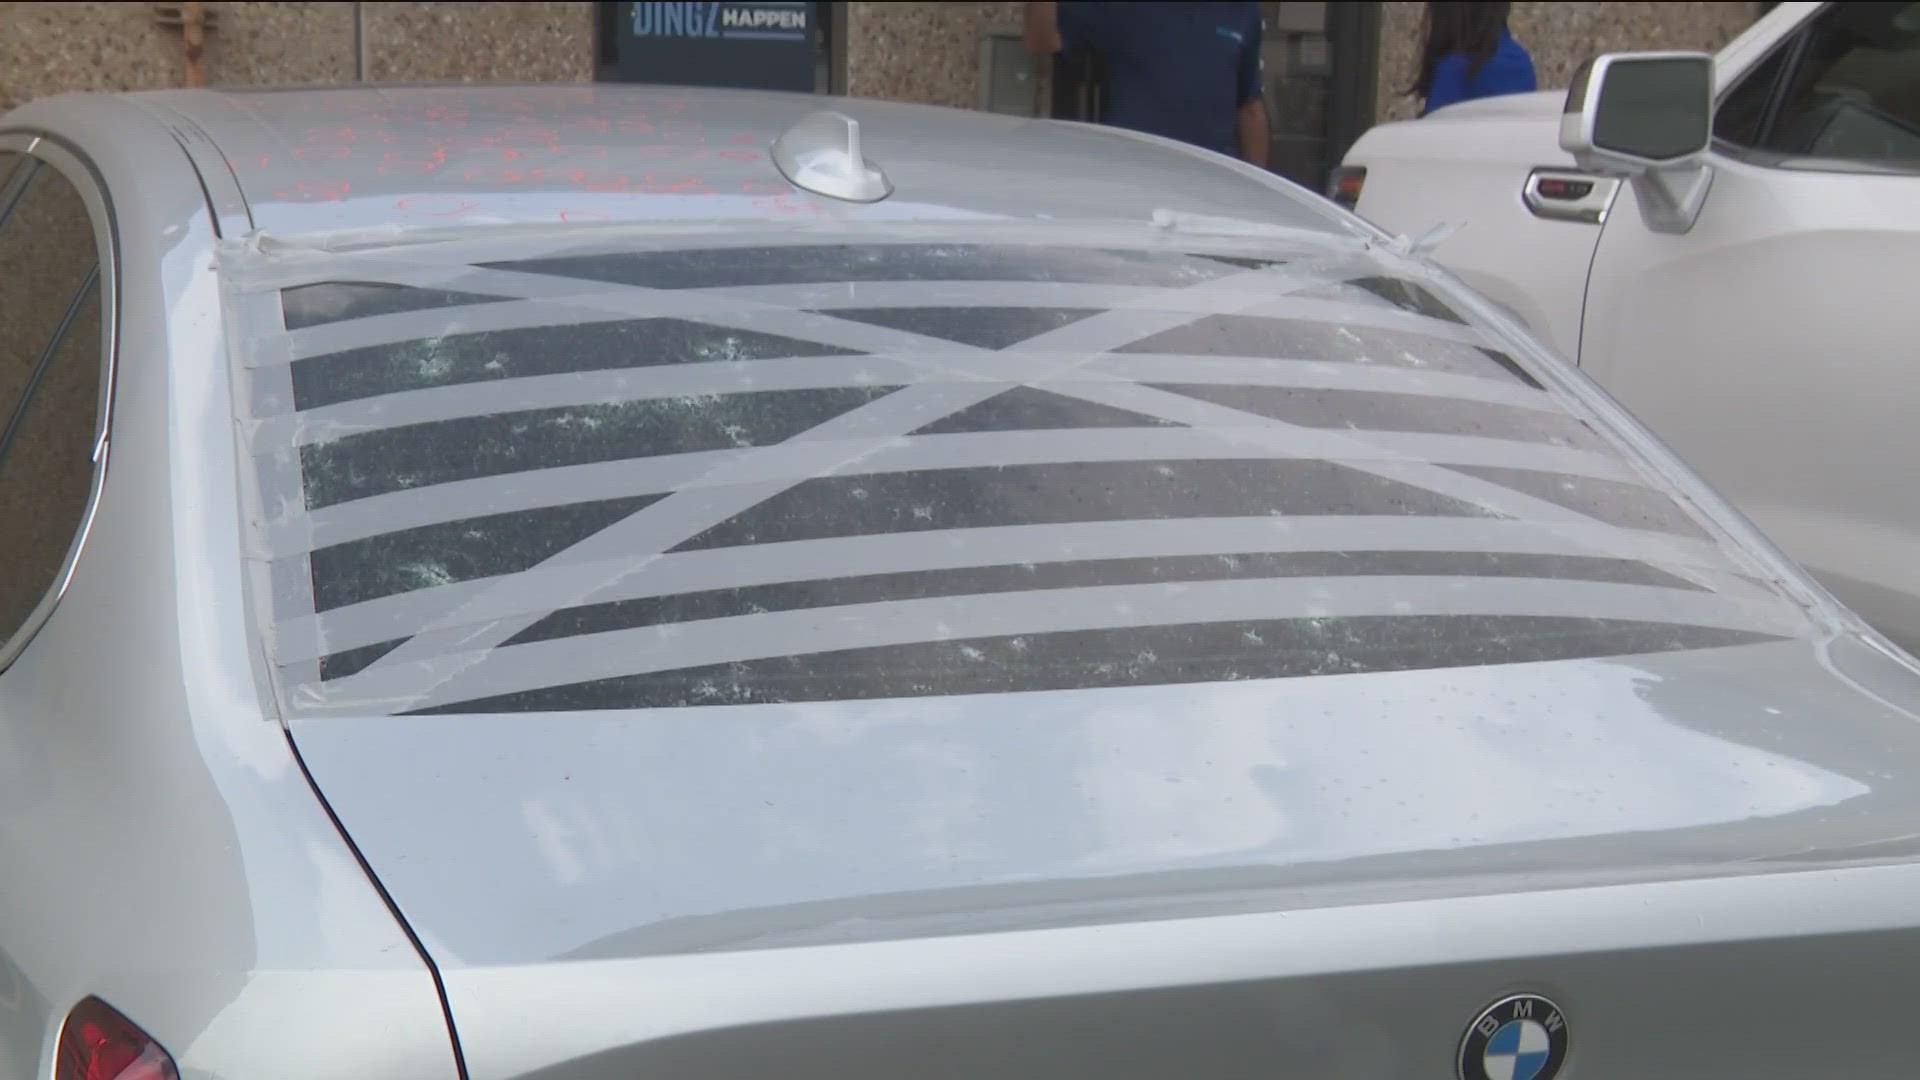 Texas is the No. 1 state when it comes to hail claims. KVUE's Isabella Basco has tips from an expert about how to protect your car.